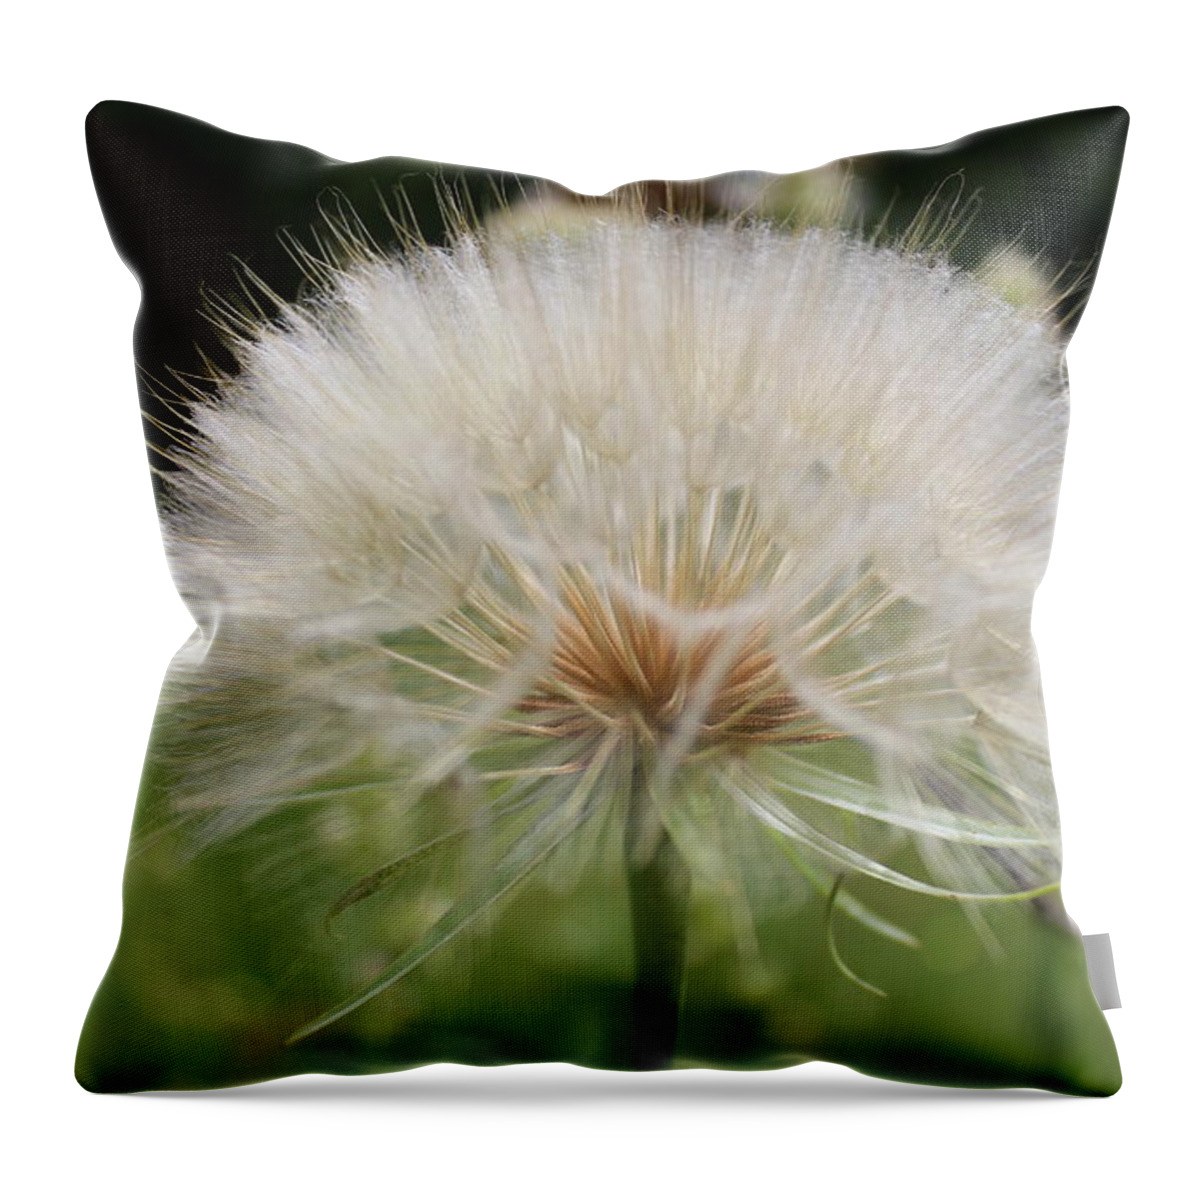 Dandelion Head Throw Pillow featuring the photograph Dandelion head close up by Martin Smith